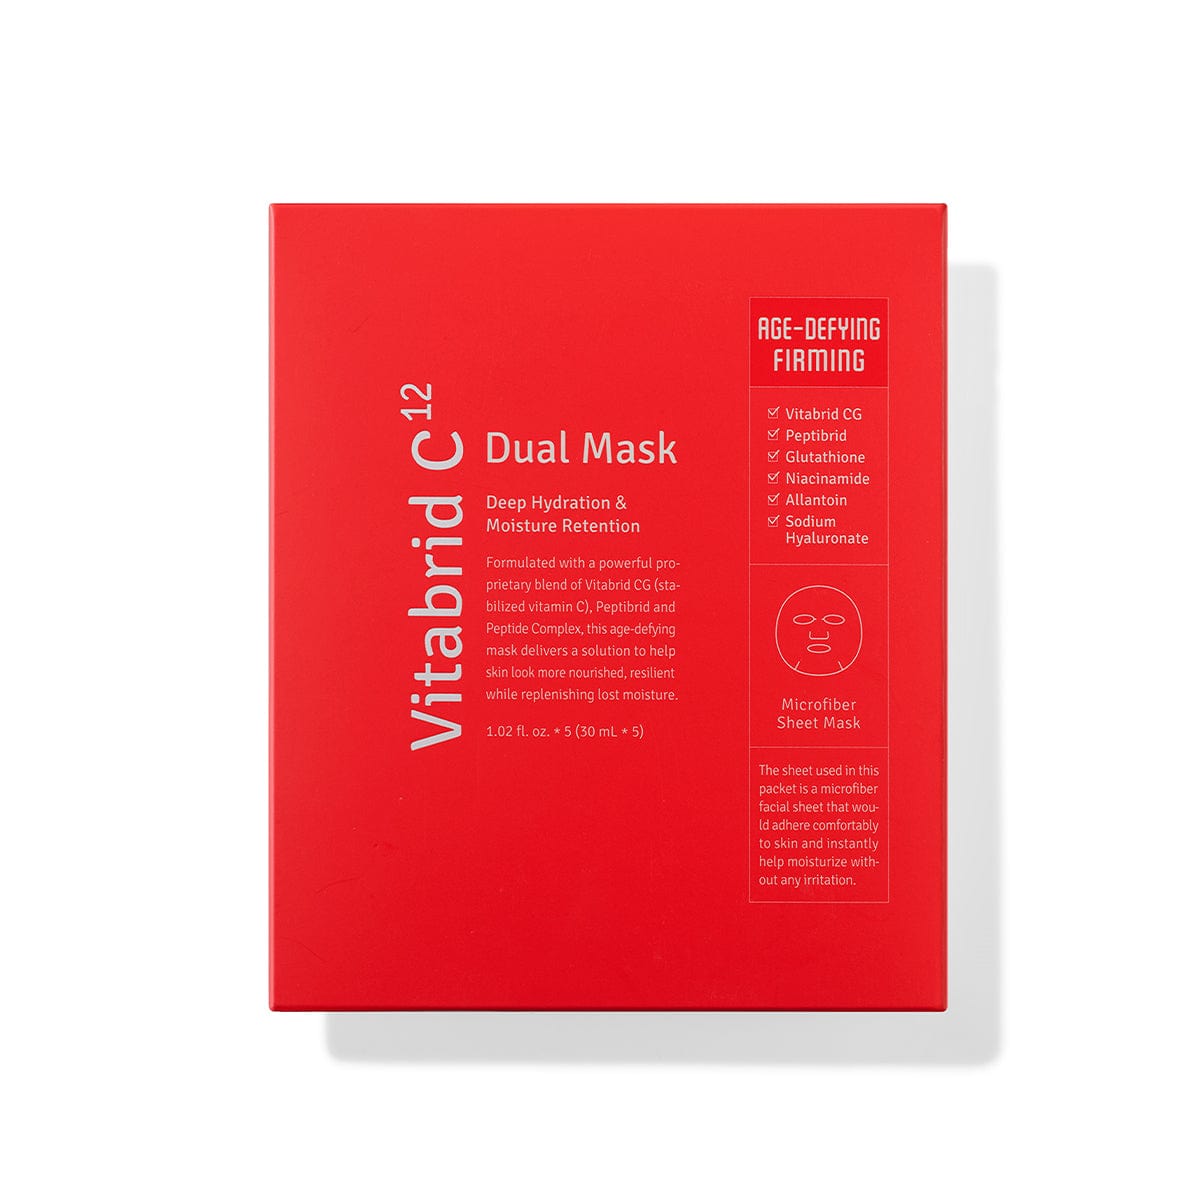 Image of Dual Mask: Age-Defying & Firming